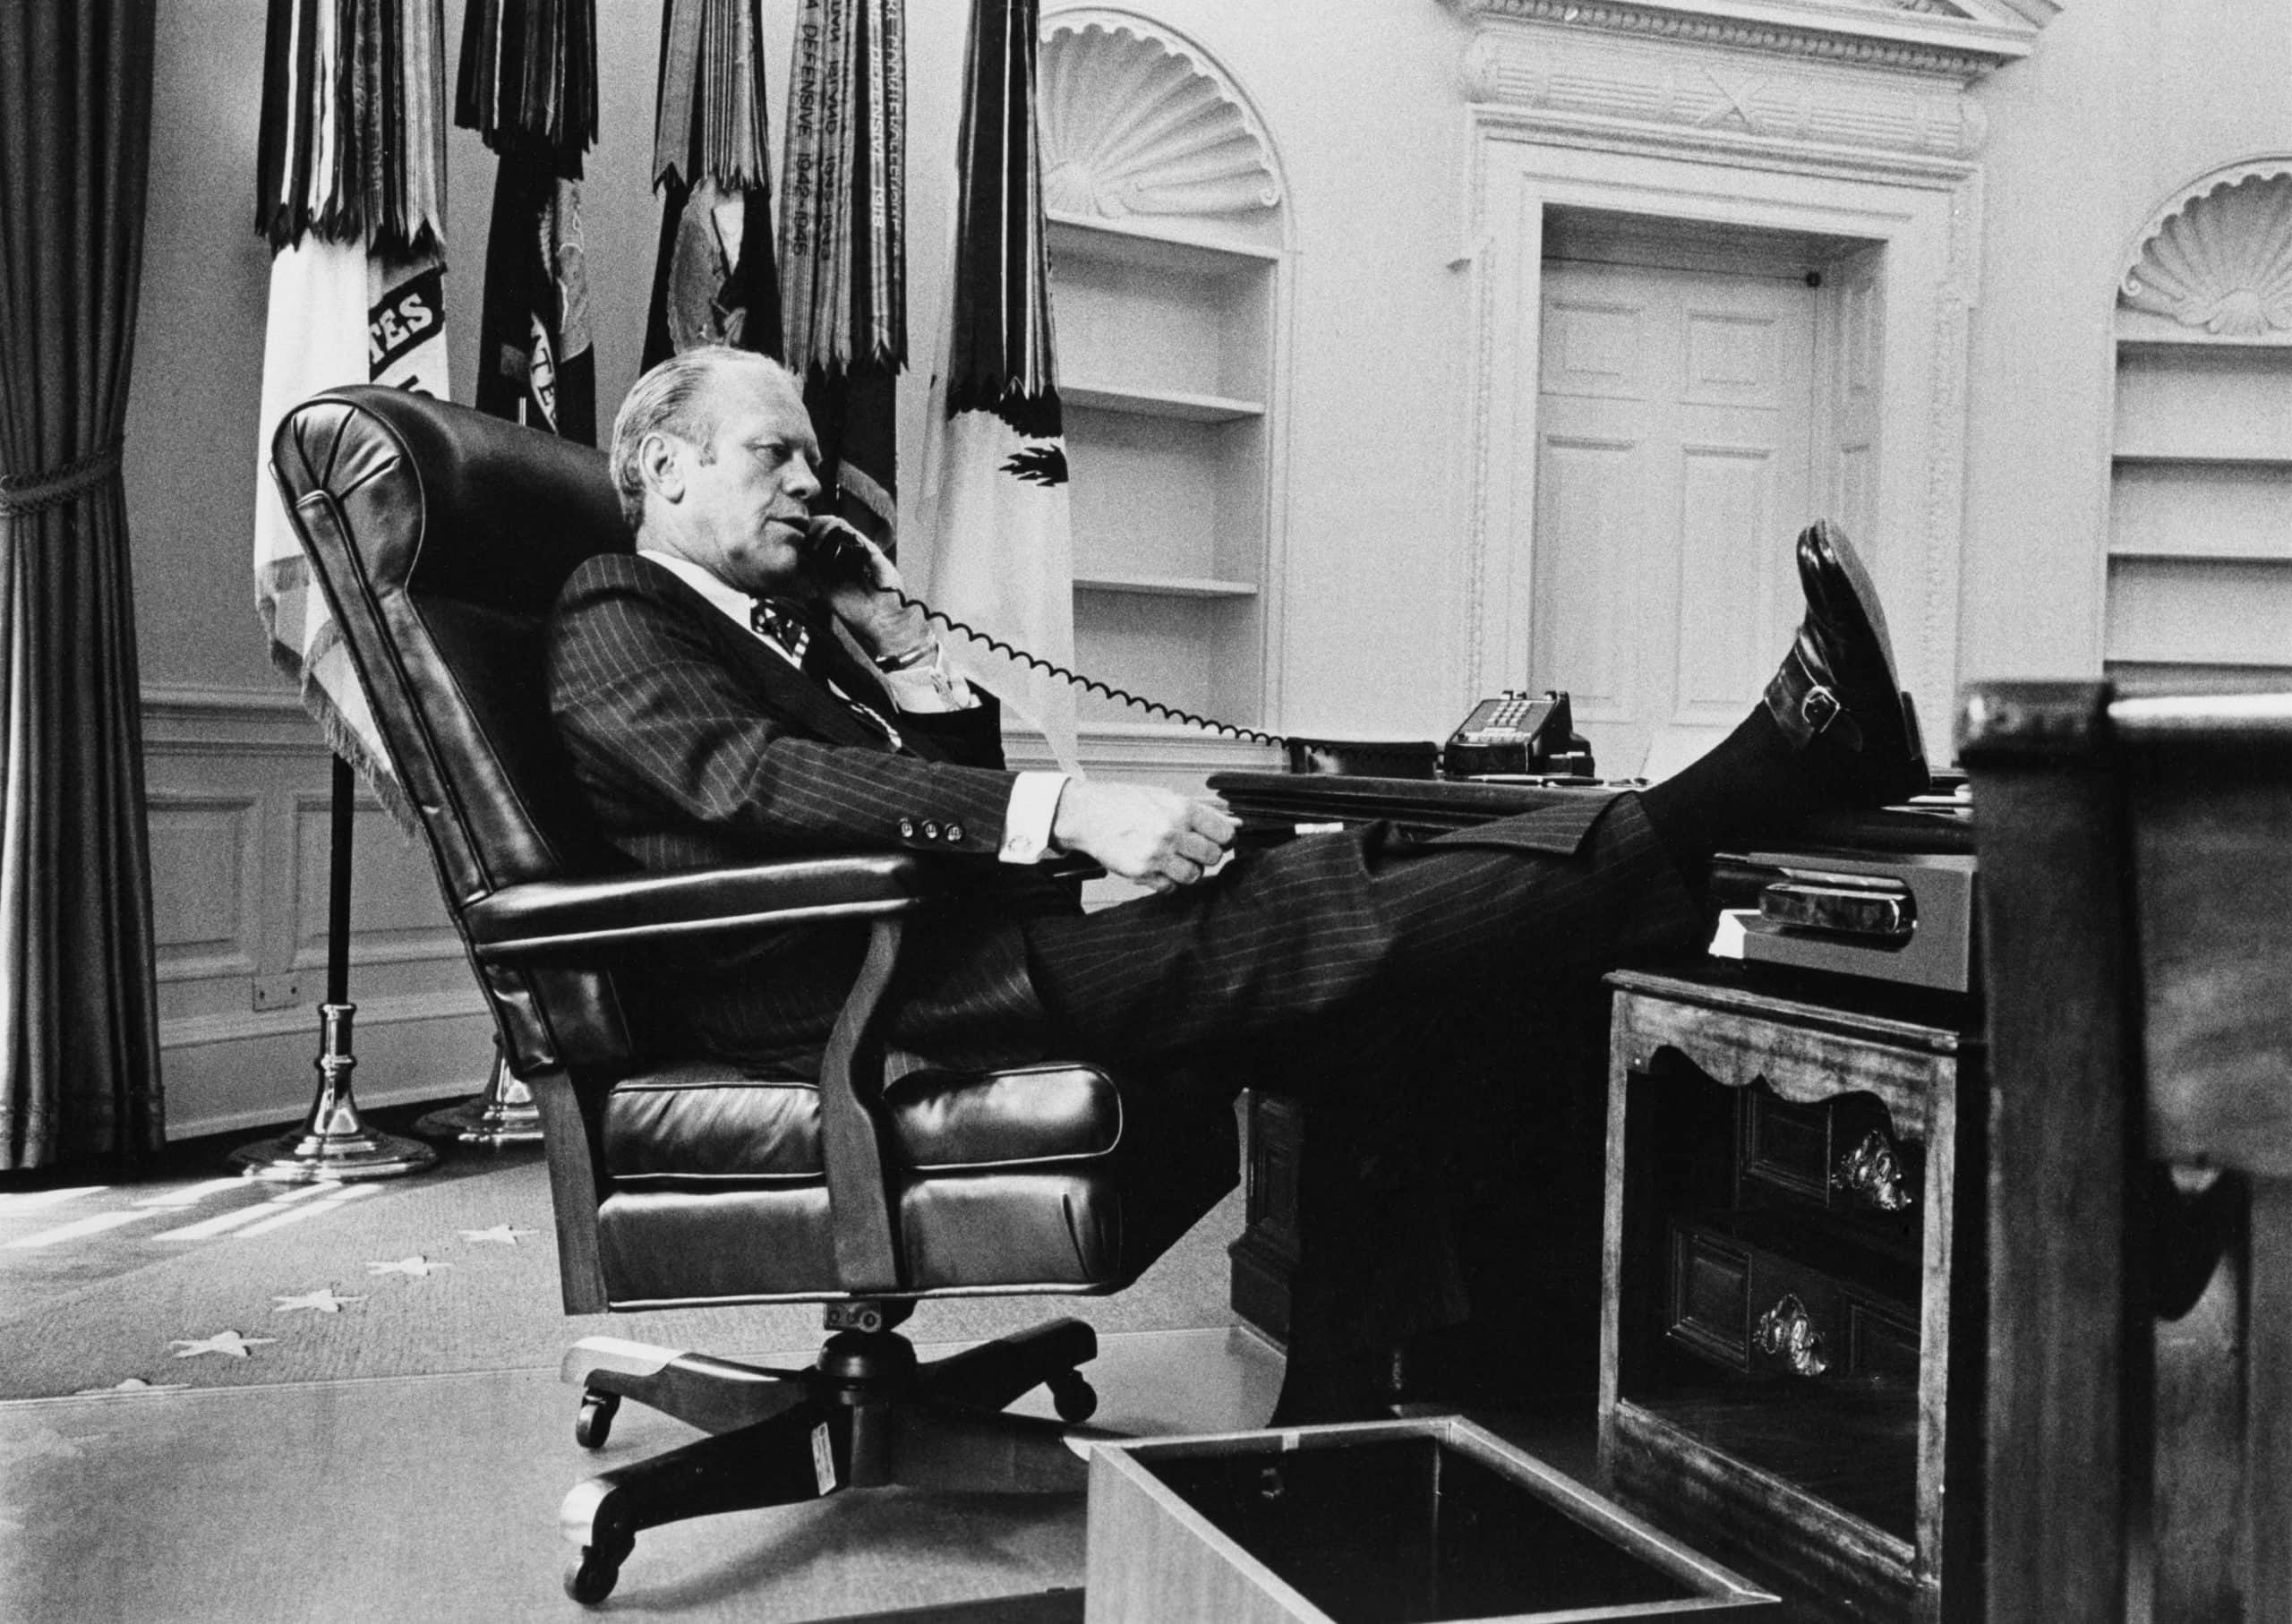 Gerald R. Ford in the Oval Office after becoming president, 1974